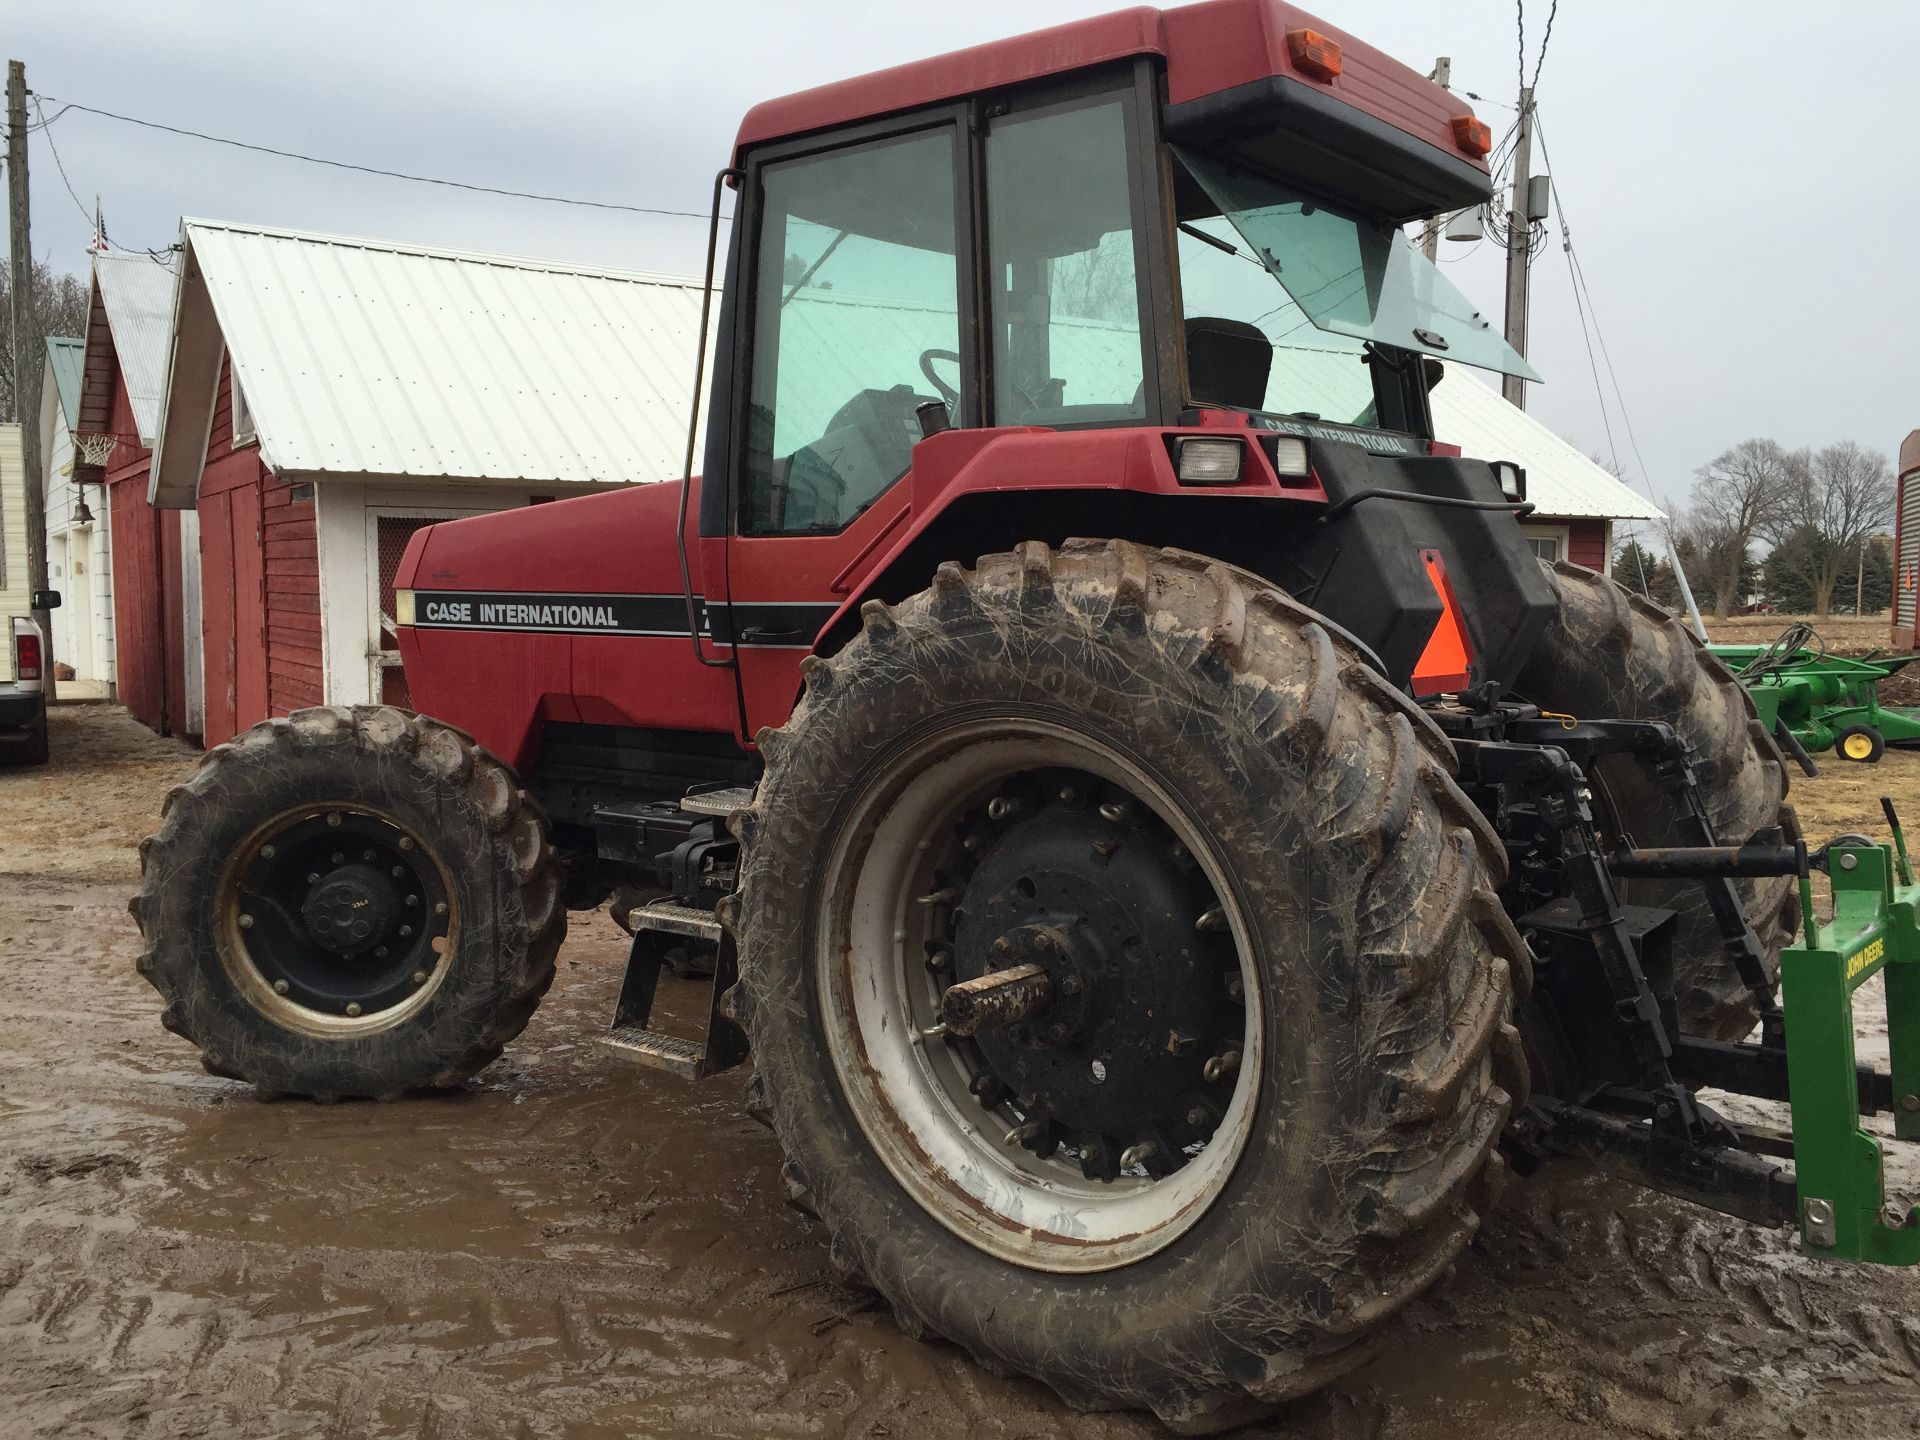 7120 Case International 4x4 Tractor ~7100hrs - not sold w/ quick hitch pictured - Image 4 of 22